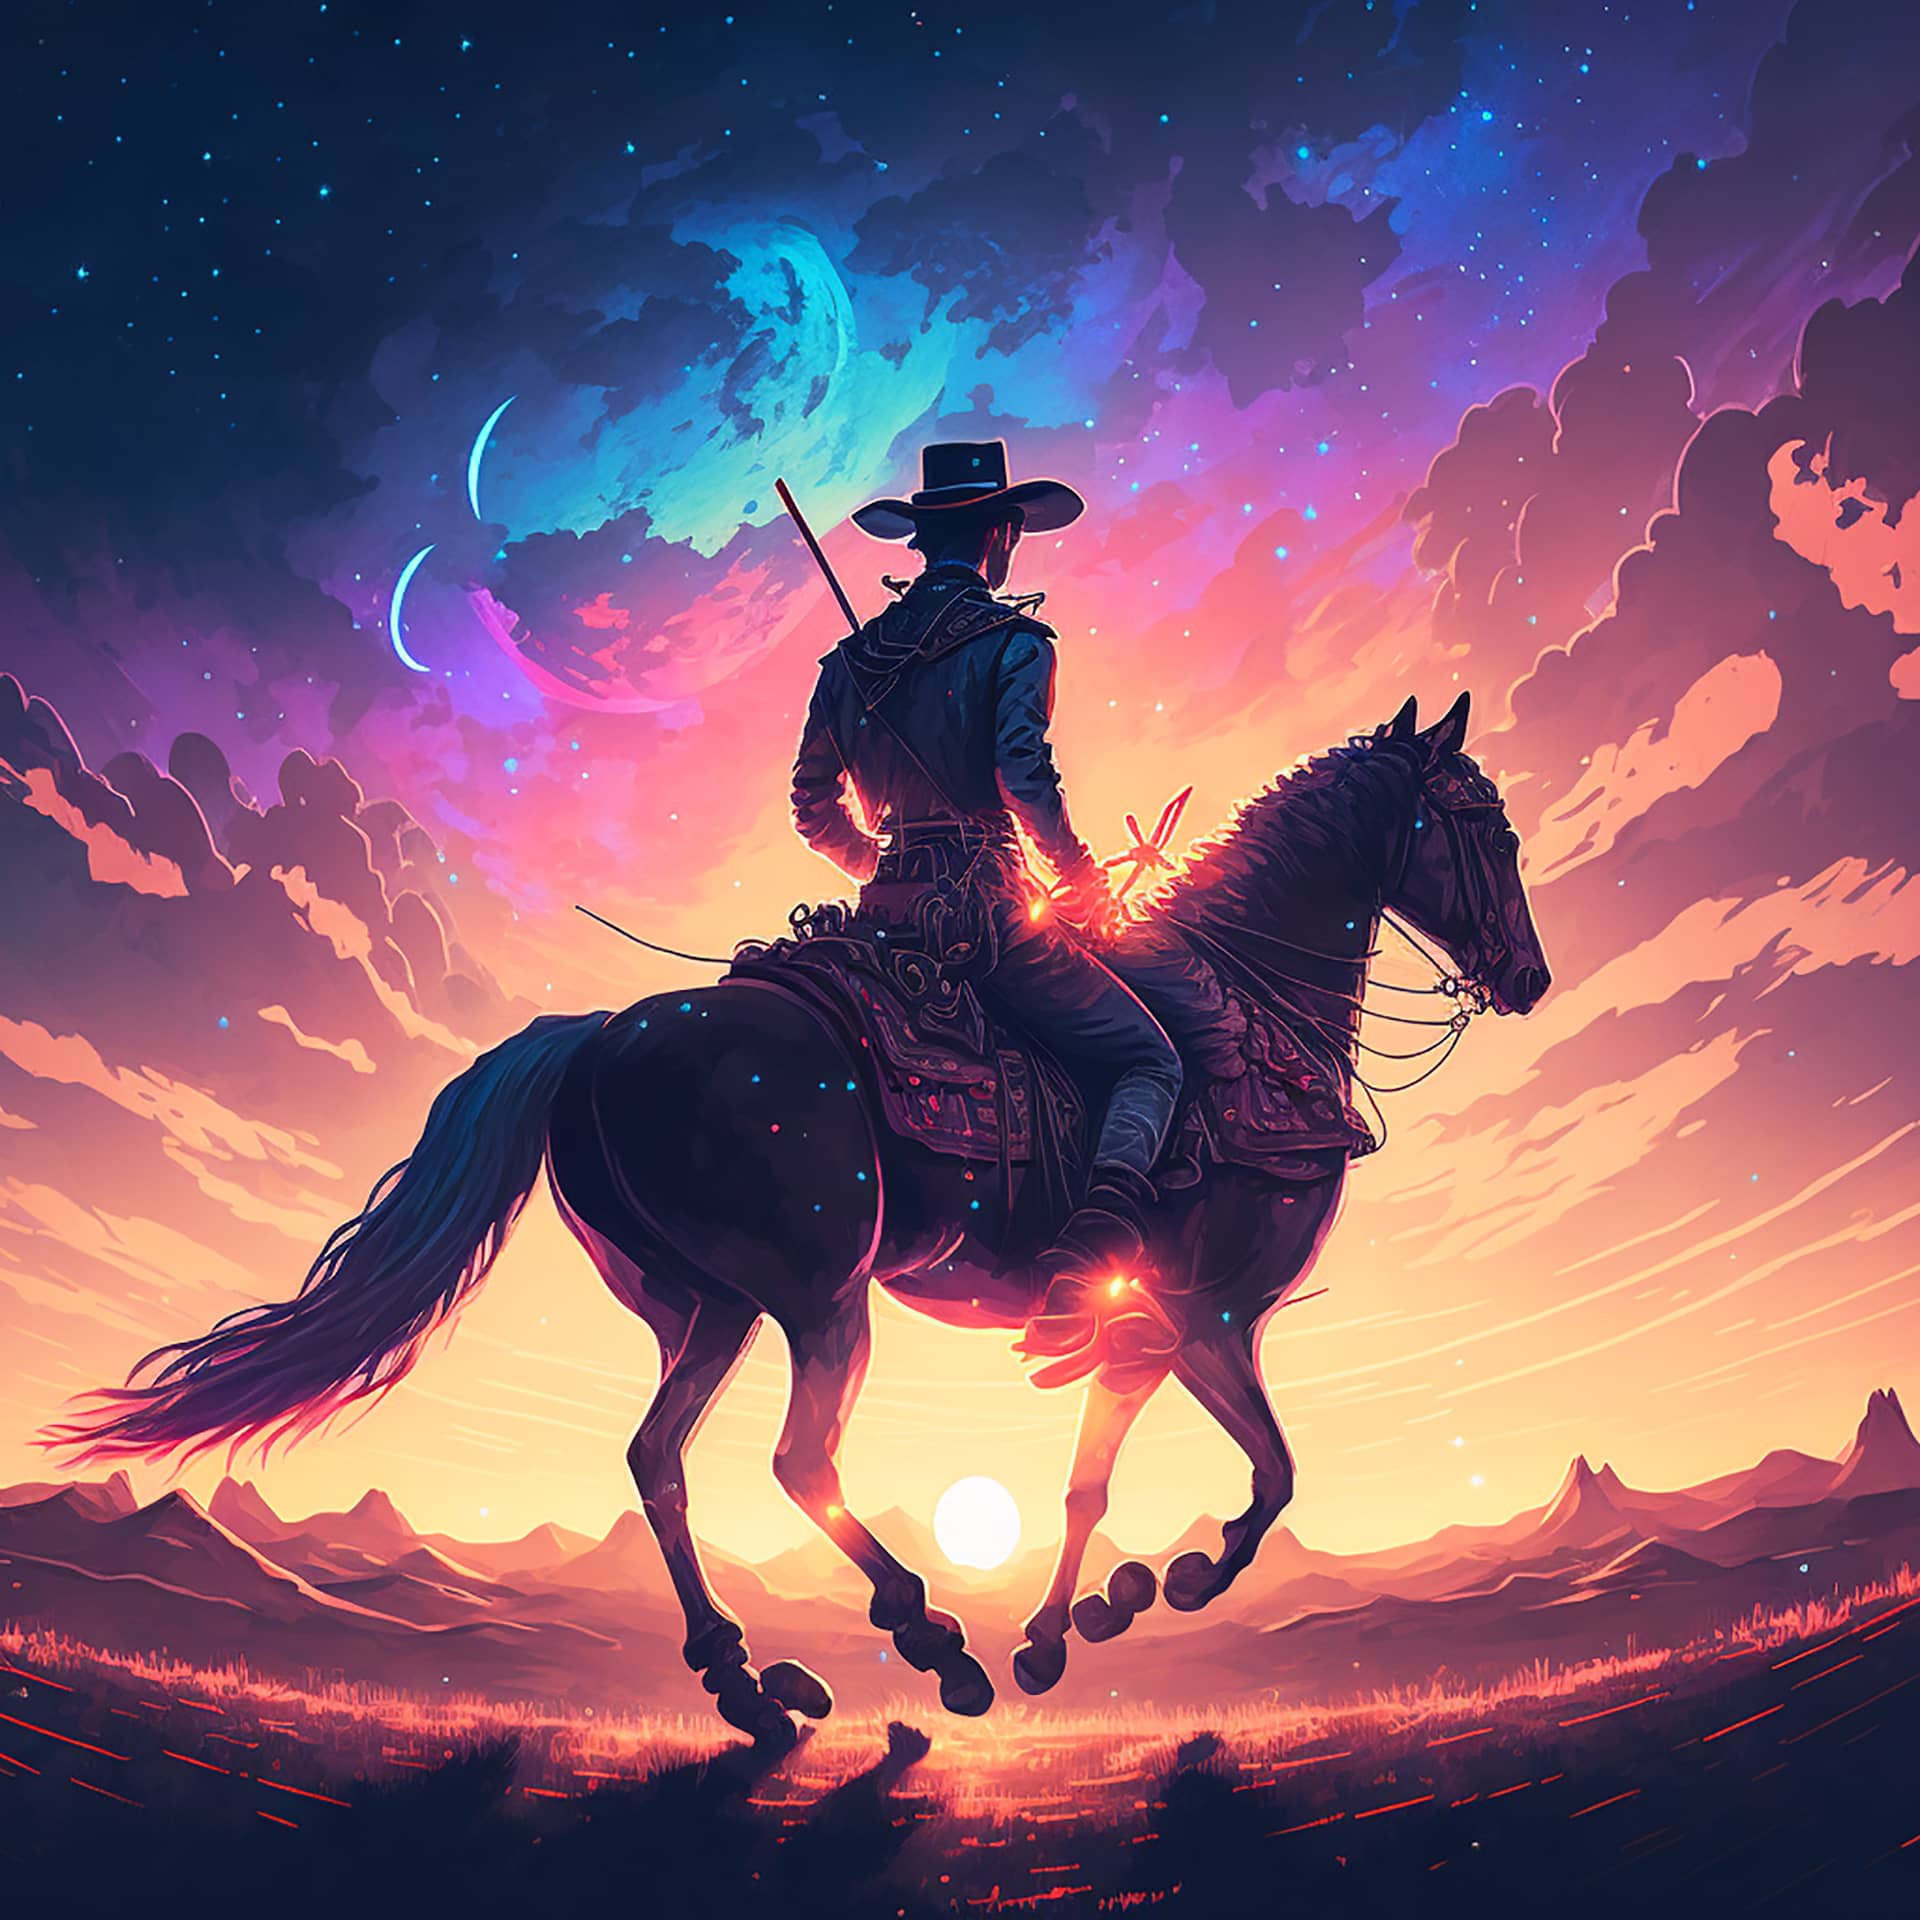 Horse against sunset sky with planets background digital art style